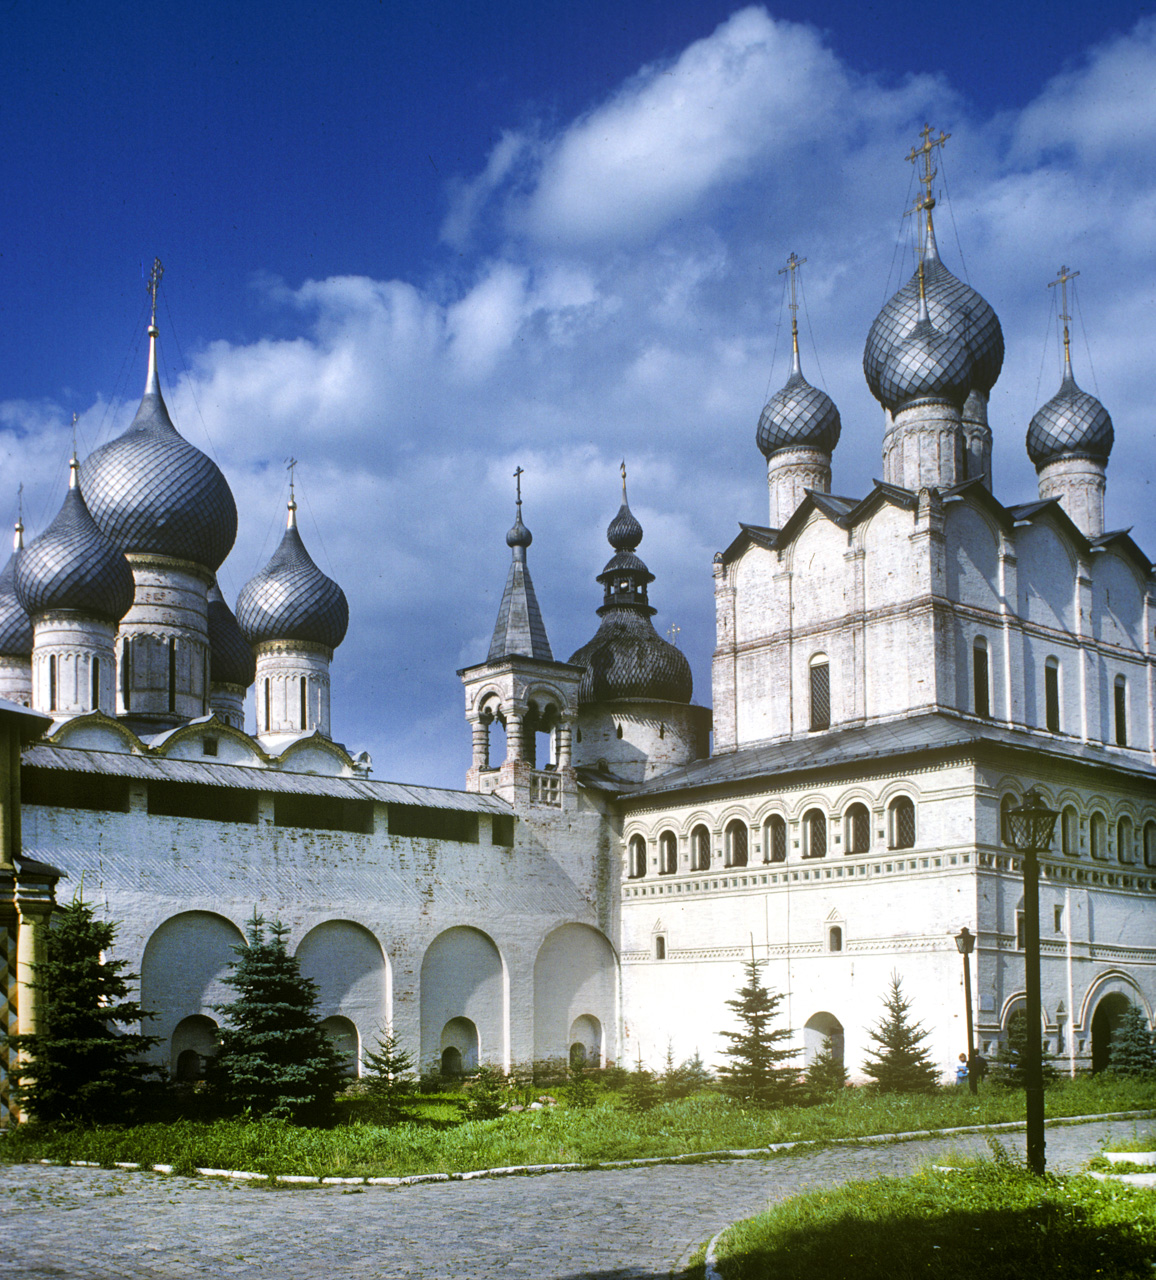 Rostov kremlin. Church of Resurrection (right), north wall, Dormition Cathedral. Southwest view. August 21, 1988. / Photo: William Brumfield